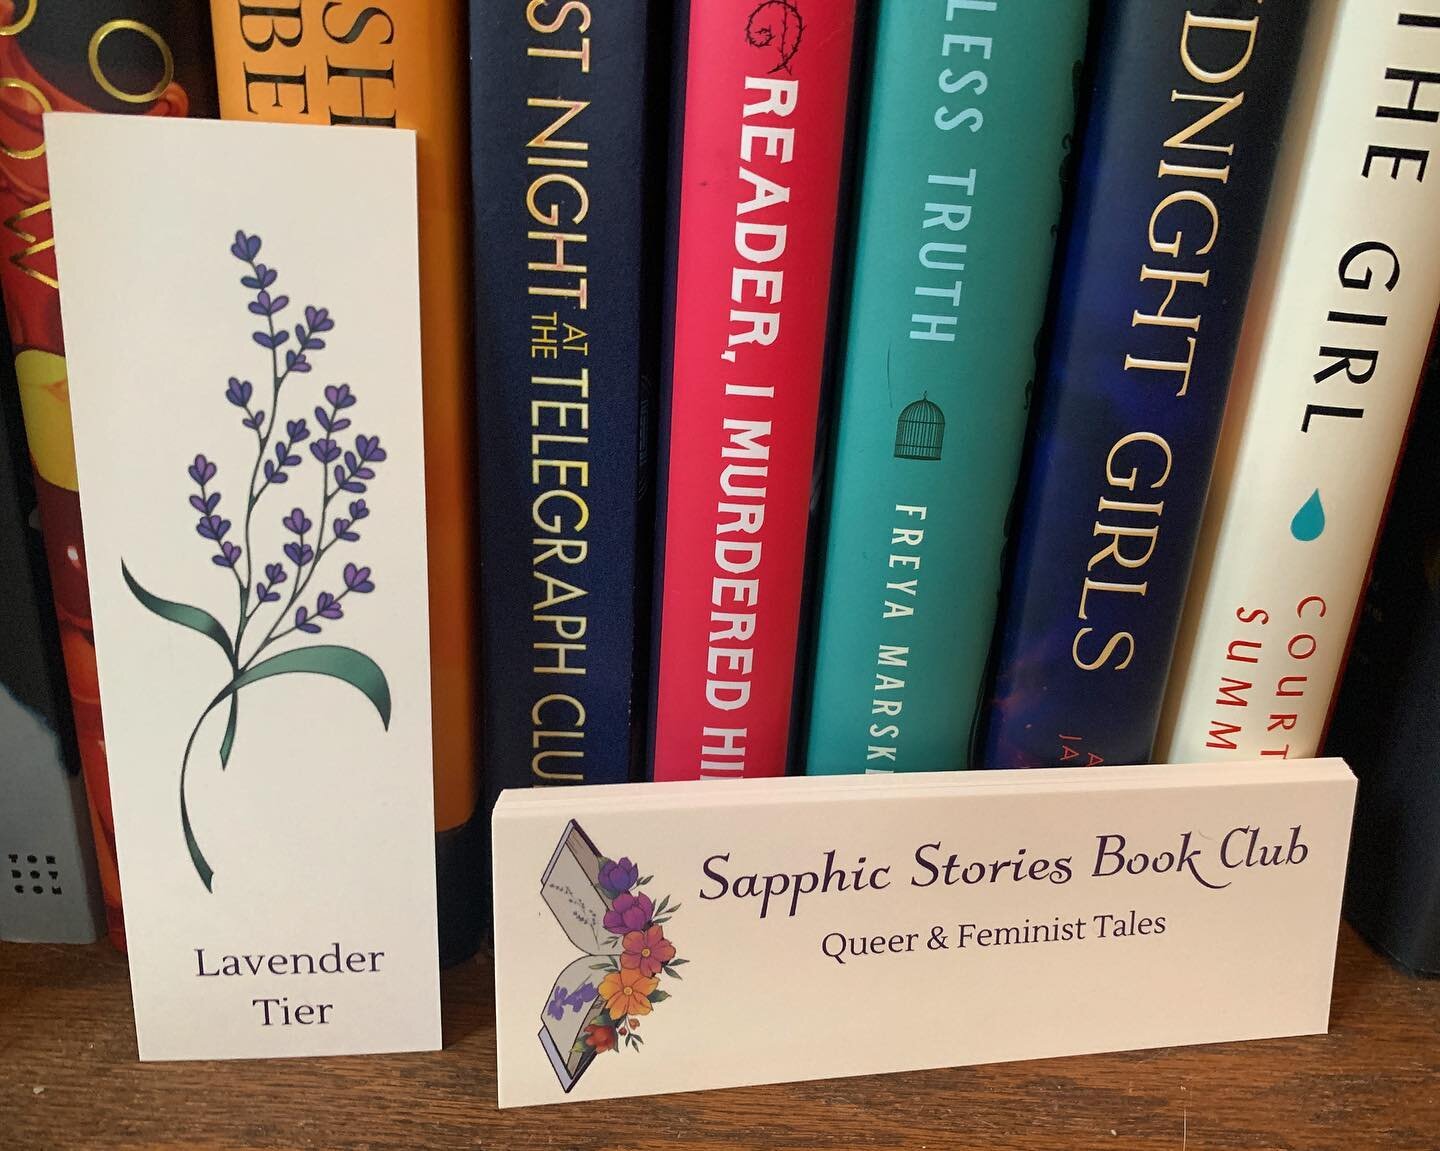 Our new welcome bookmarks arrived! 🤩

I&rsquo;m so happy with how they turned out, and LOVE having the Lavender Tier design prominently displayed on the back. 

These beauties will be sent out to our current members soon, but you can receive one as 